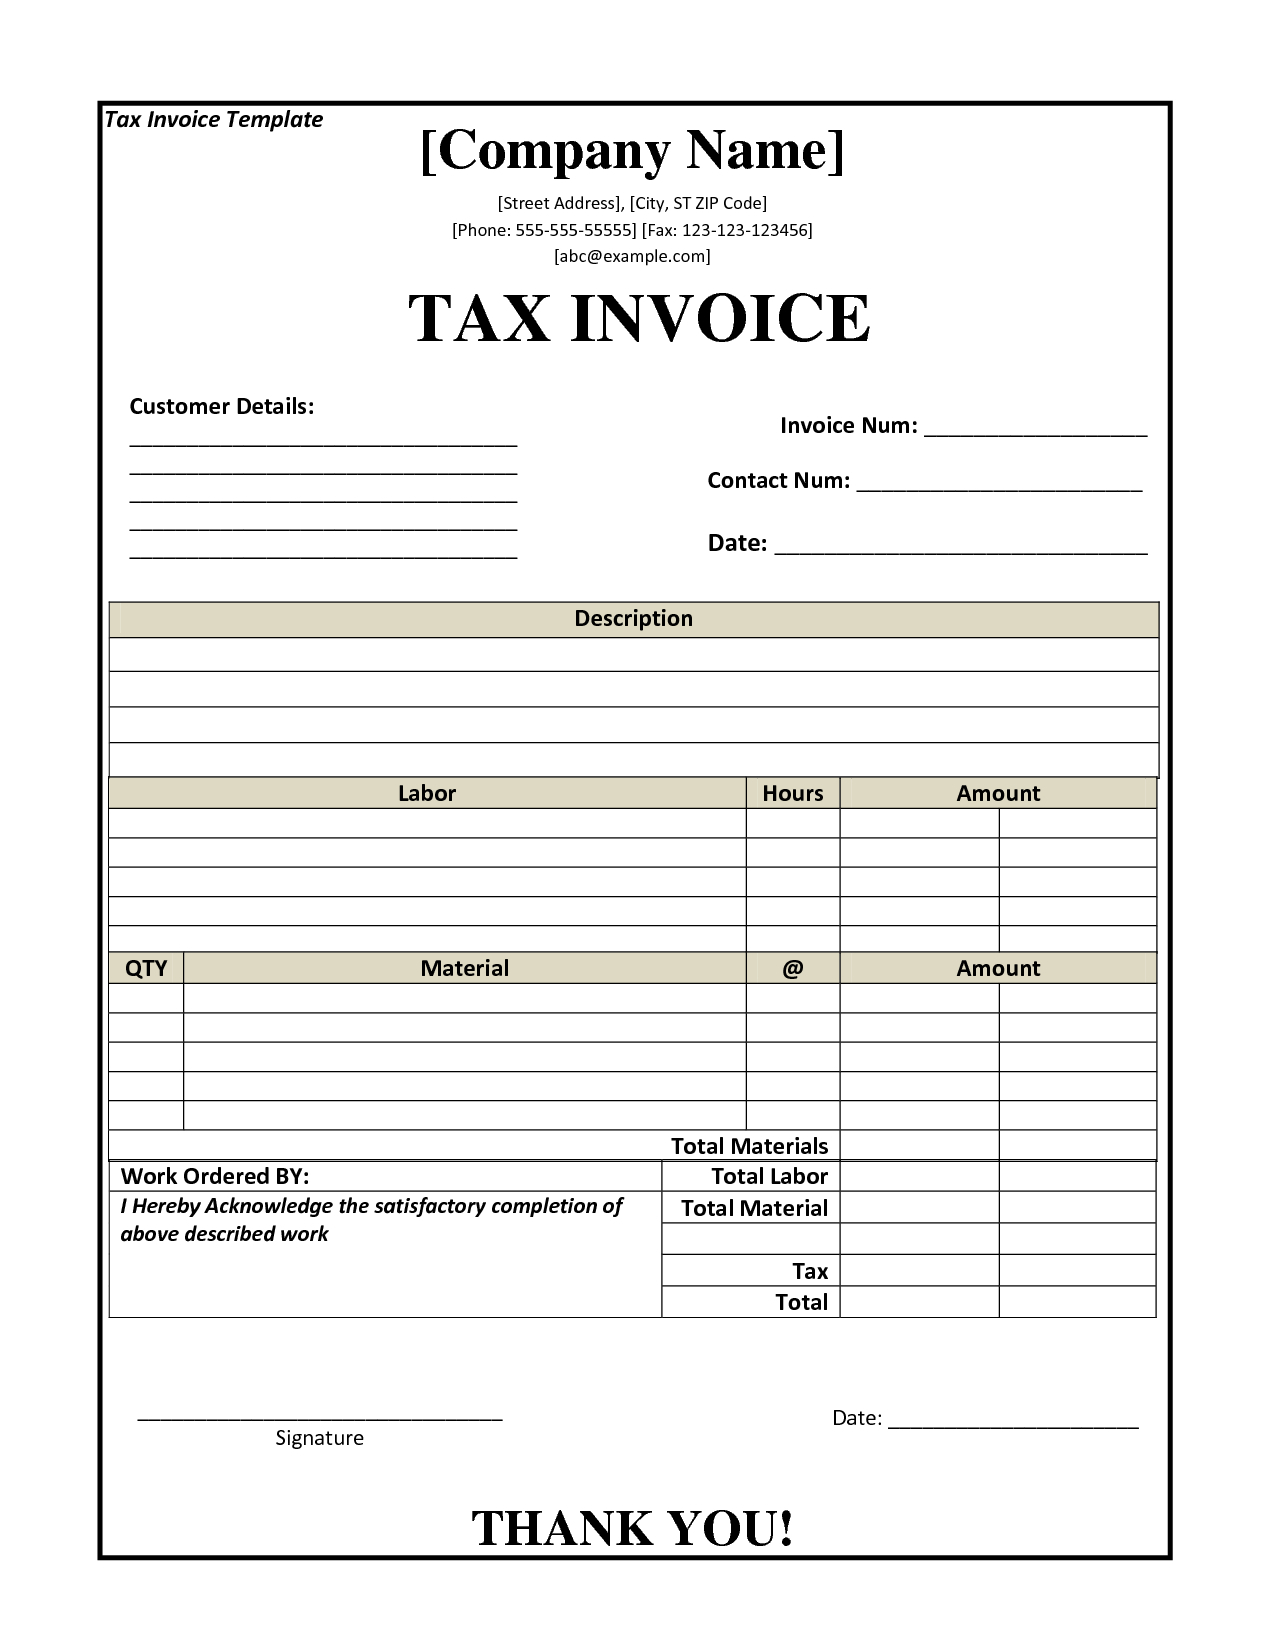 Tax Invoice Template Nz | Invoice Example Within Invoice Template New Zealand